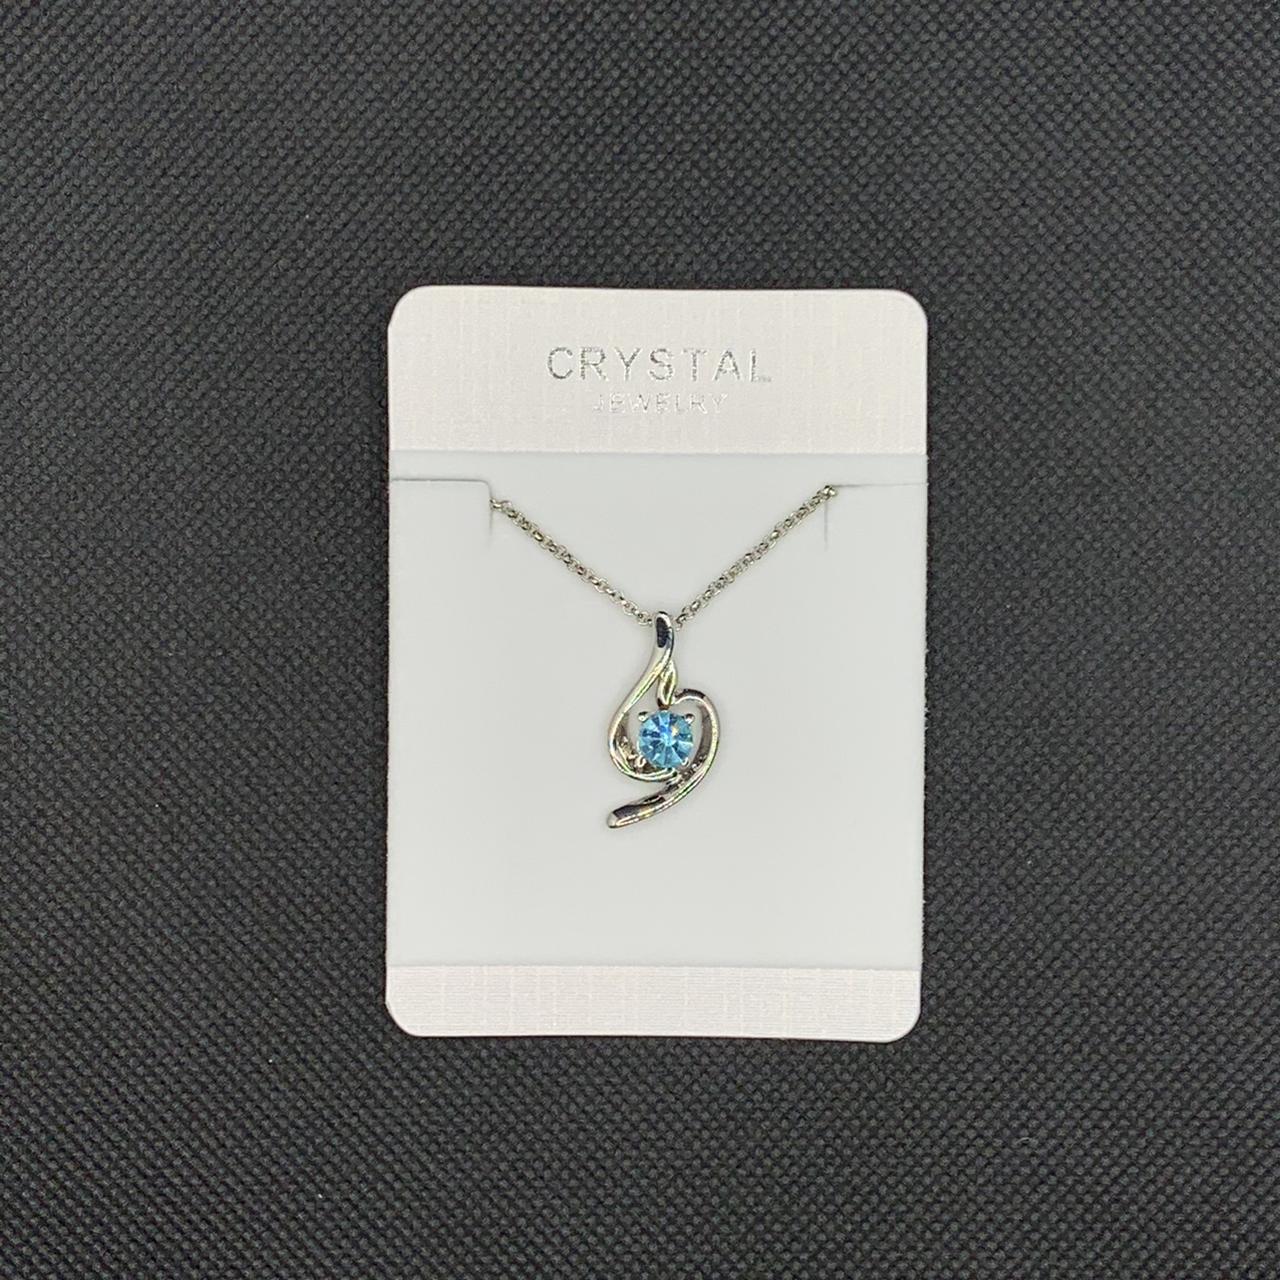 BLUE AND SILVER NECKLACE PLATED PENDANT 18”... - Depop